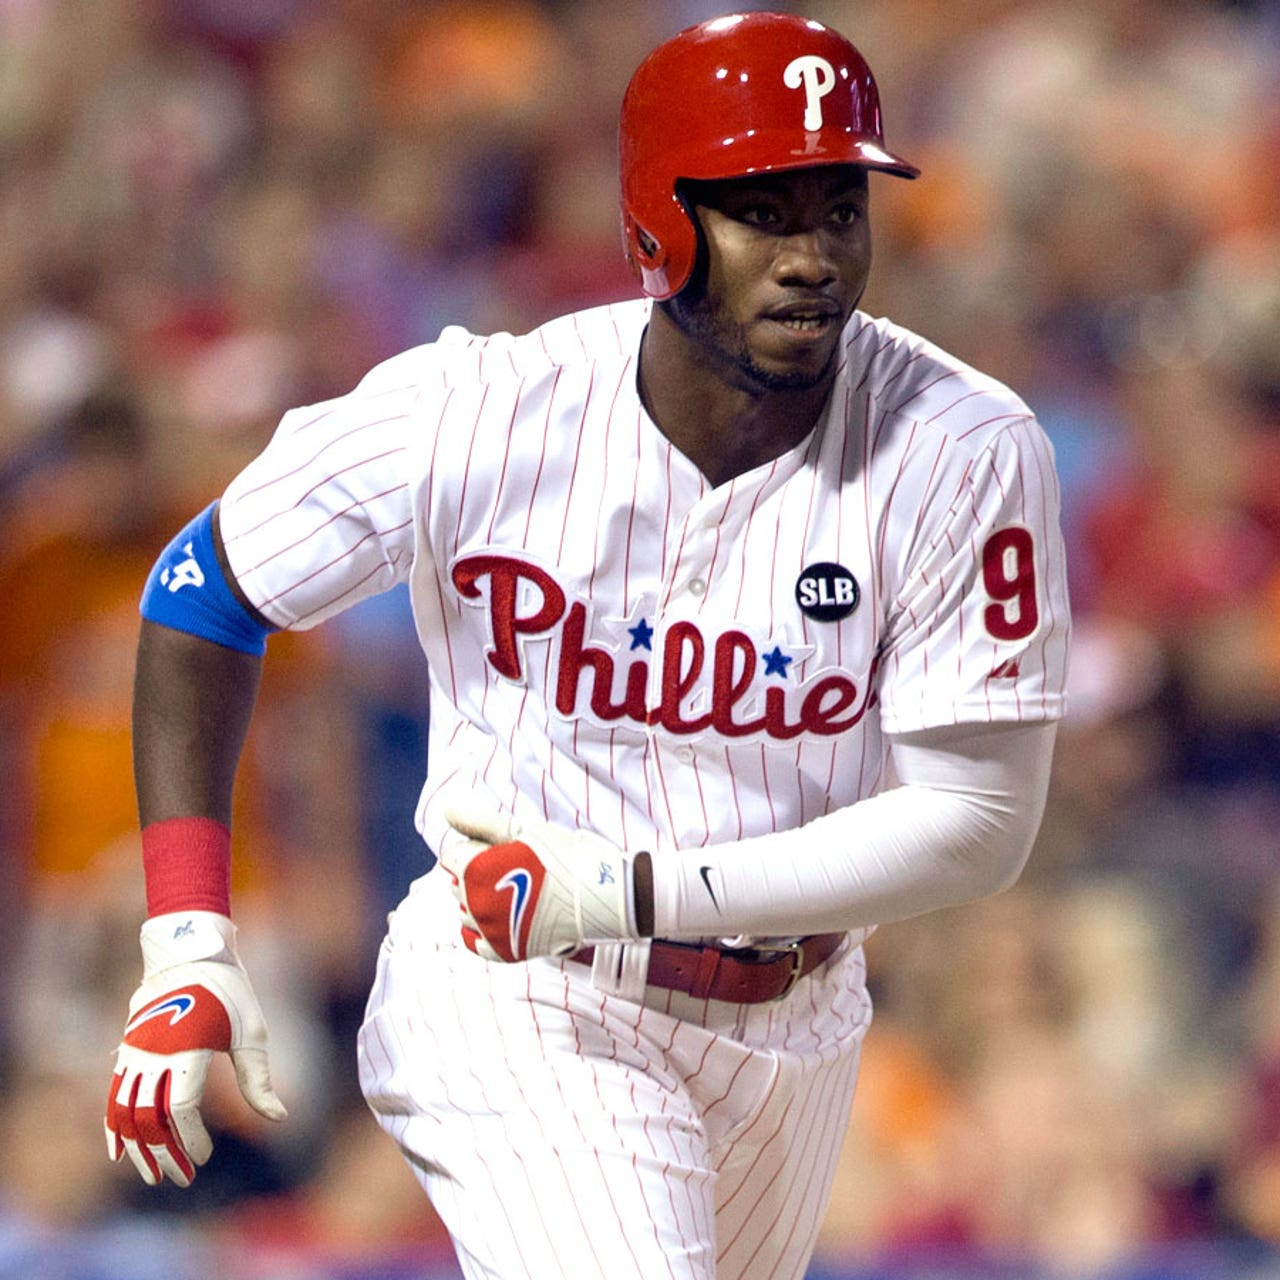 Domonic Brown's last chance with the Phillies? He doesn't see it that way